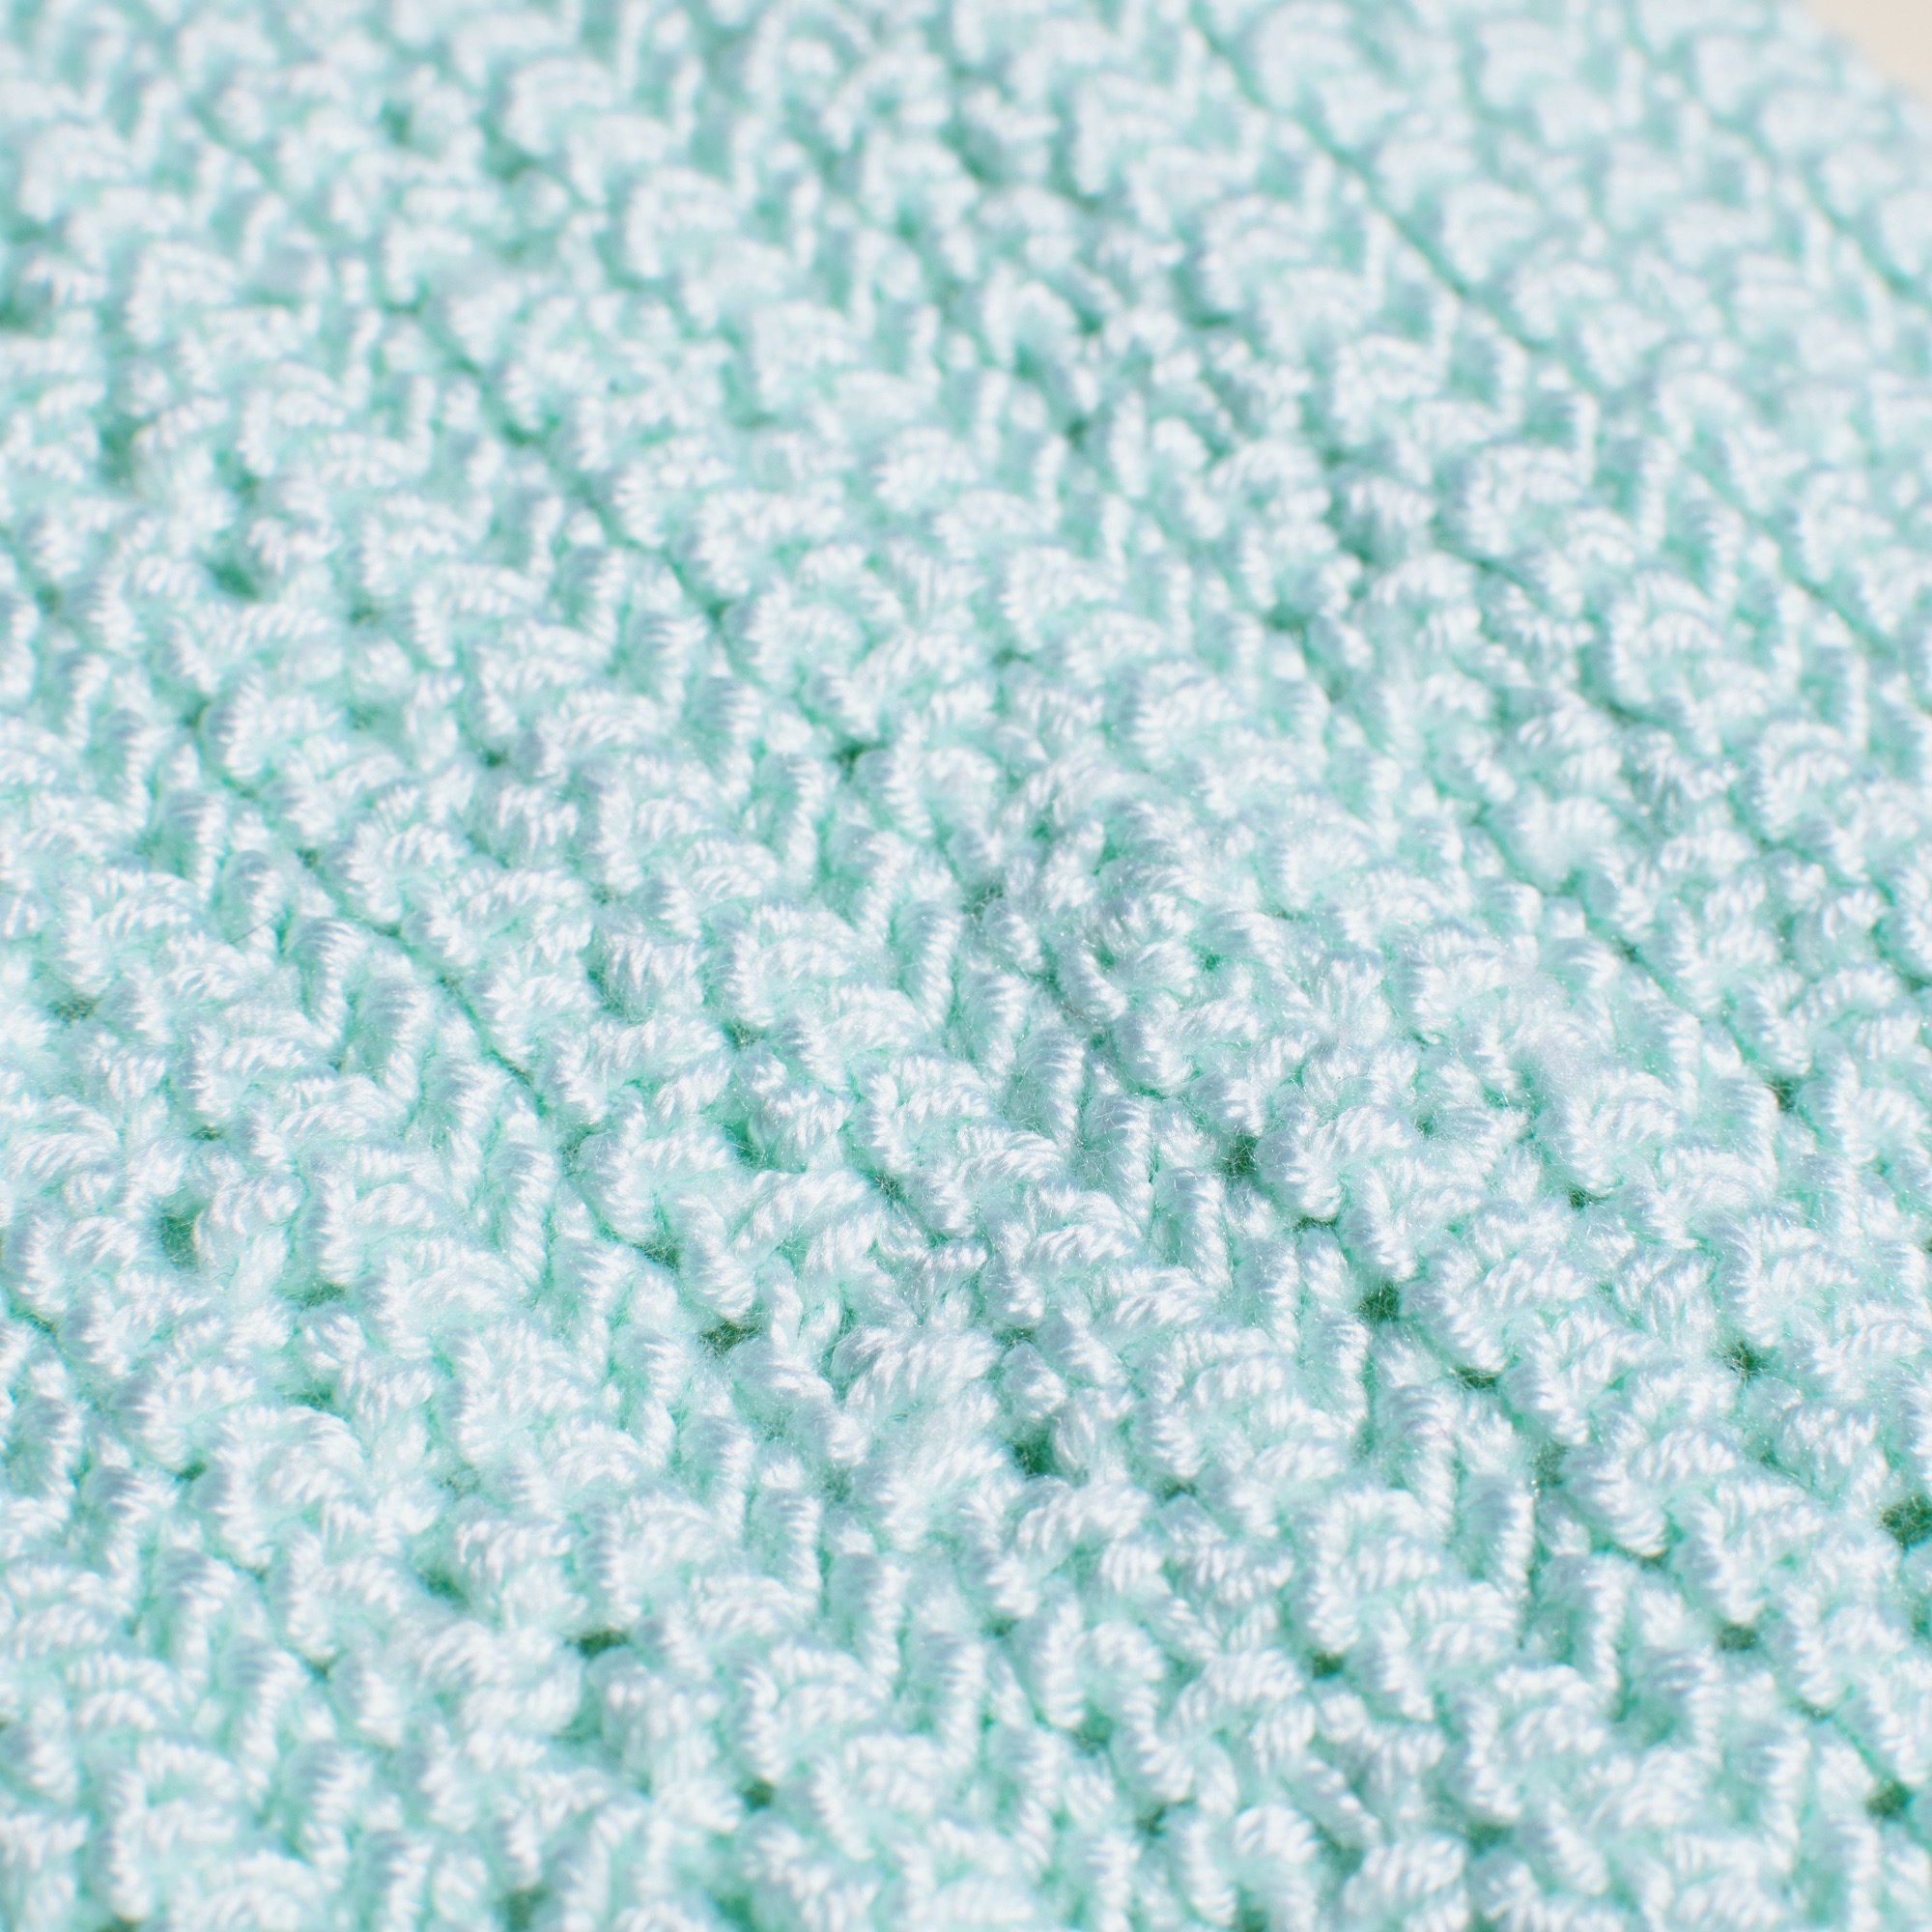 Check out the texture on this baby bib crochet pattern